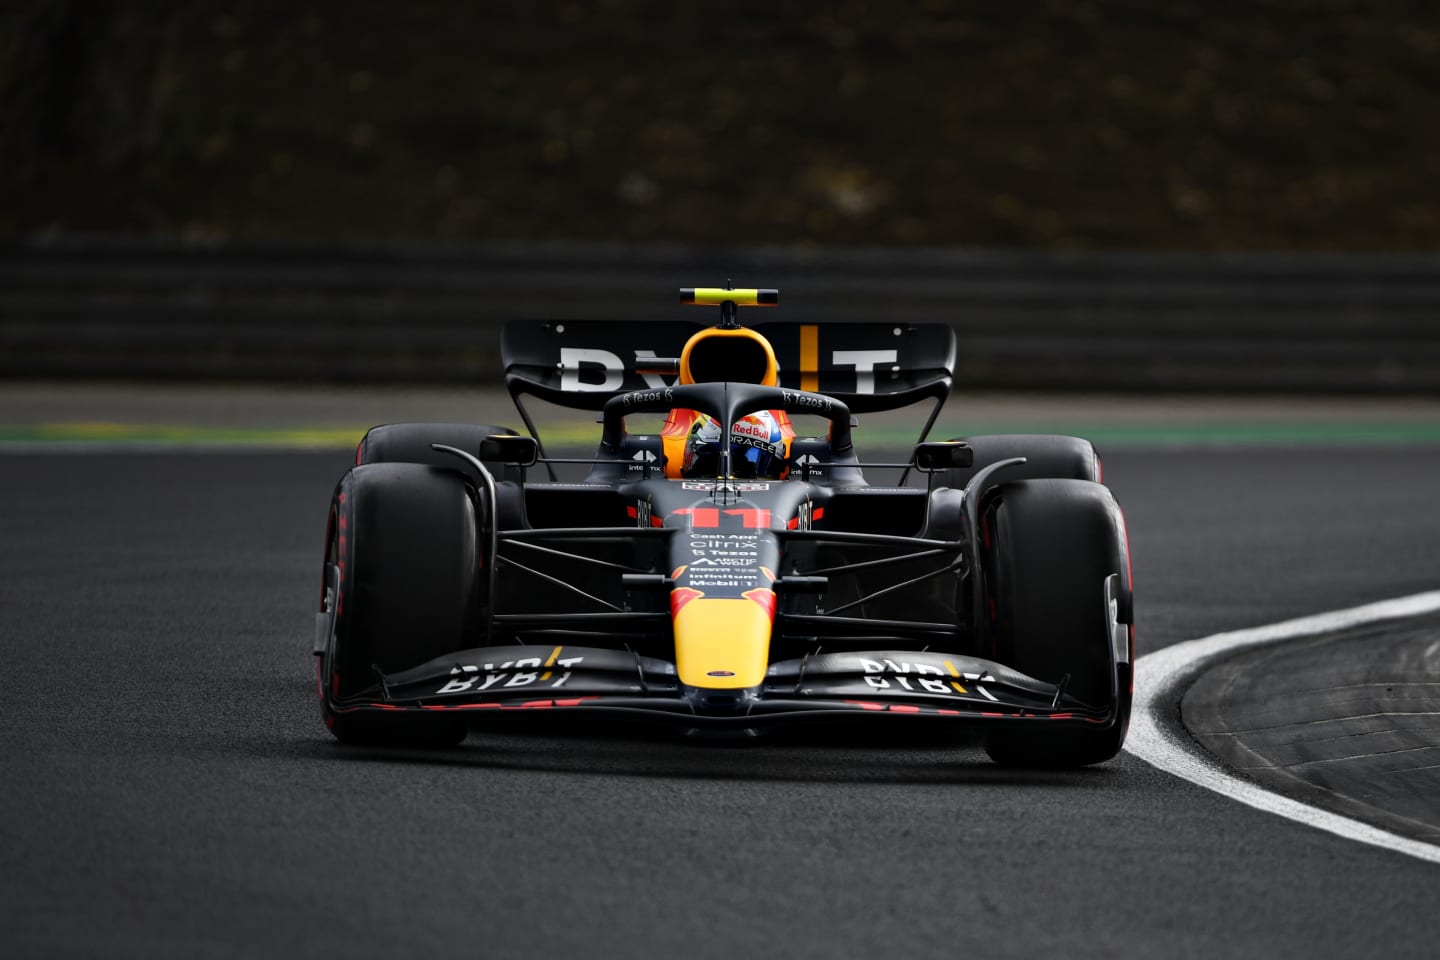 BUDAPEST, HUNGARY - JULY 30: Sergio Perez of Mexico driving the (11) Oracle Red Bull Racing RB18 on track during qualifying ahead of the F1 Grand Prix of Hungary at Hungaroring on July 30, 2022 in Budapest, Hungary. (Photo by Rudy Carezzevoli - Formula 1/Formula 1 via Getty Images)